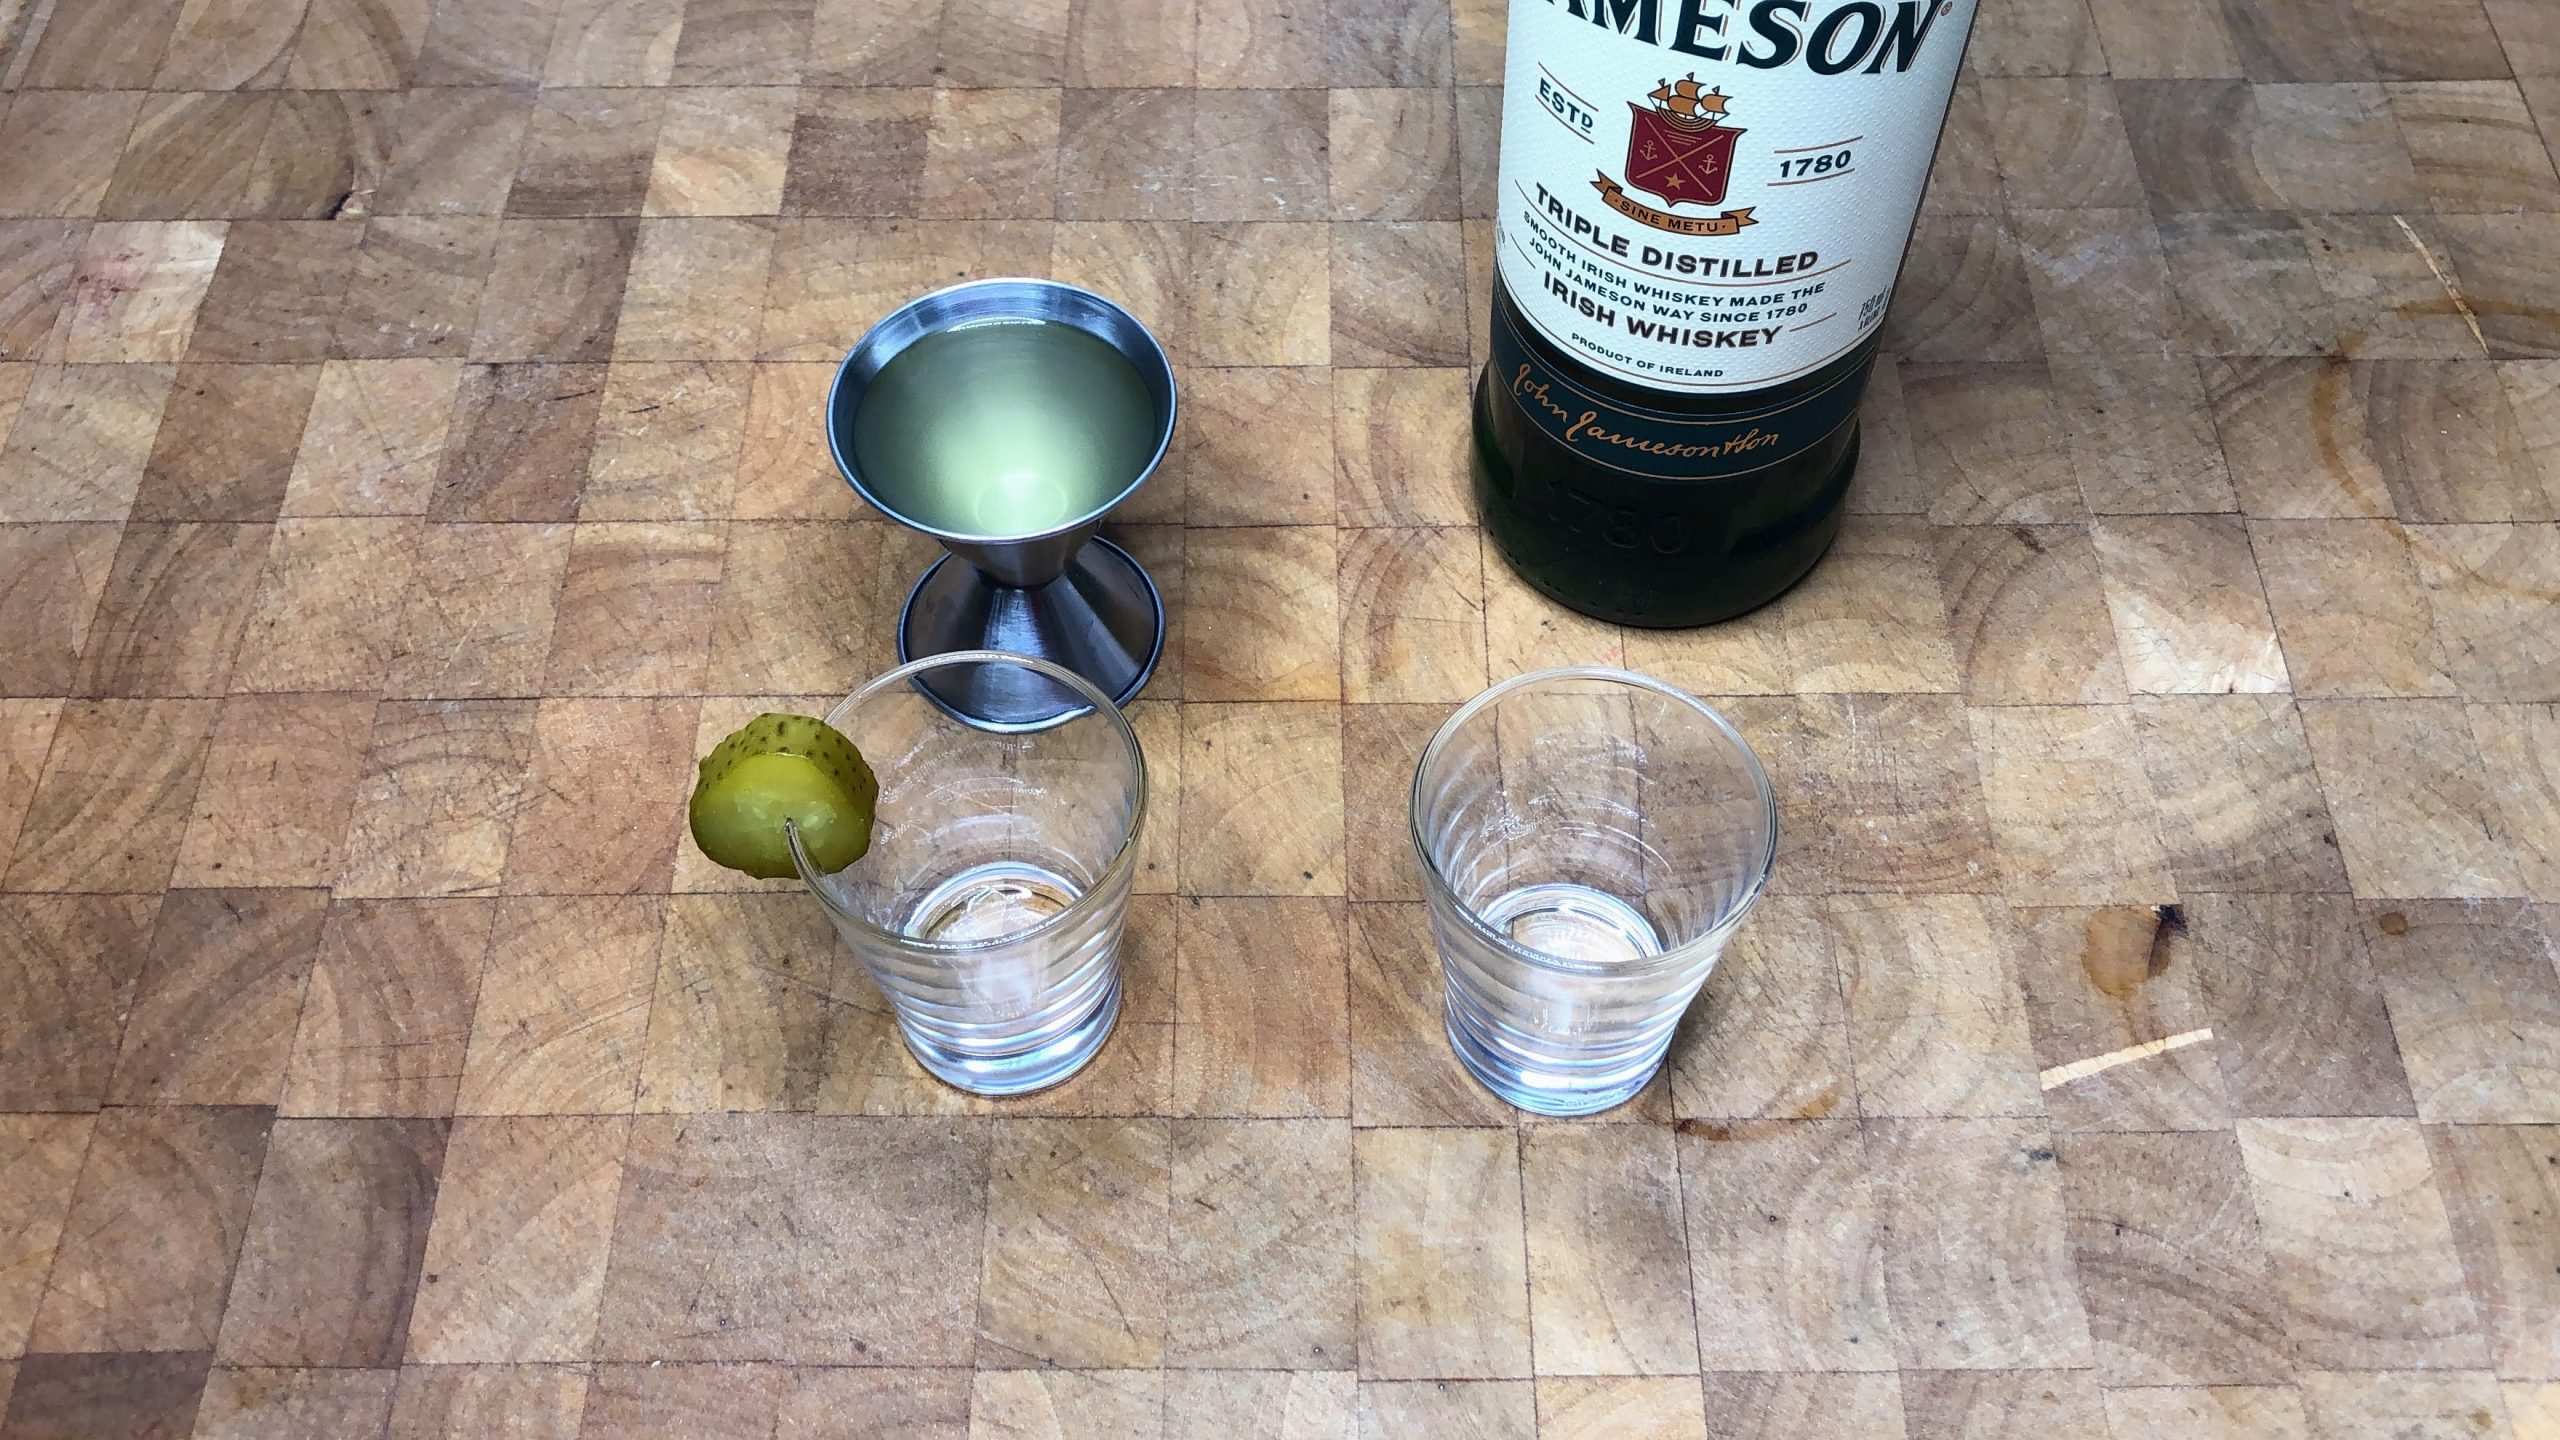 Whiskey next to a jigger with pickle juice and two shot glasses.